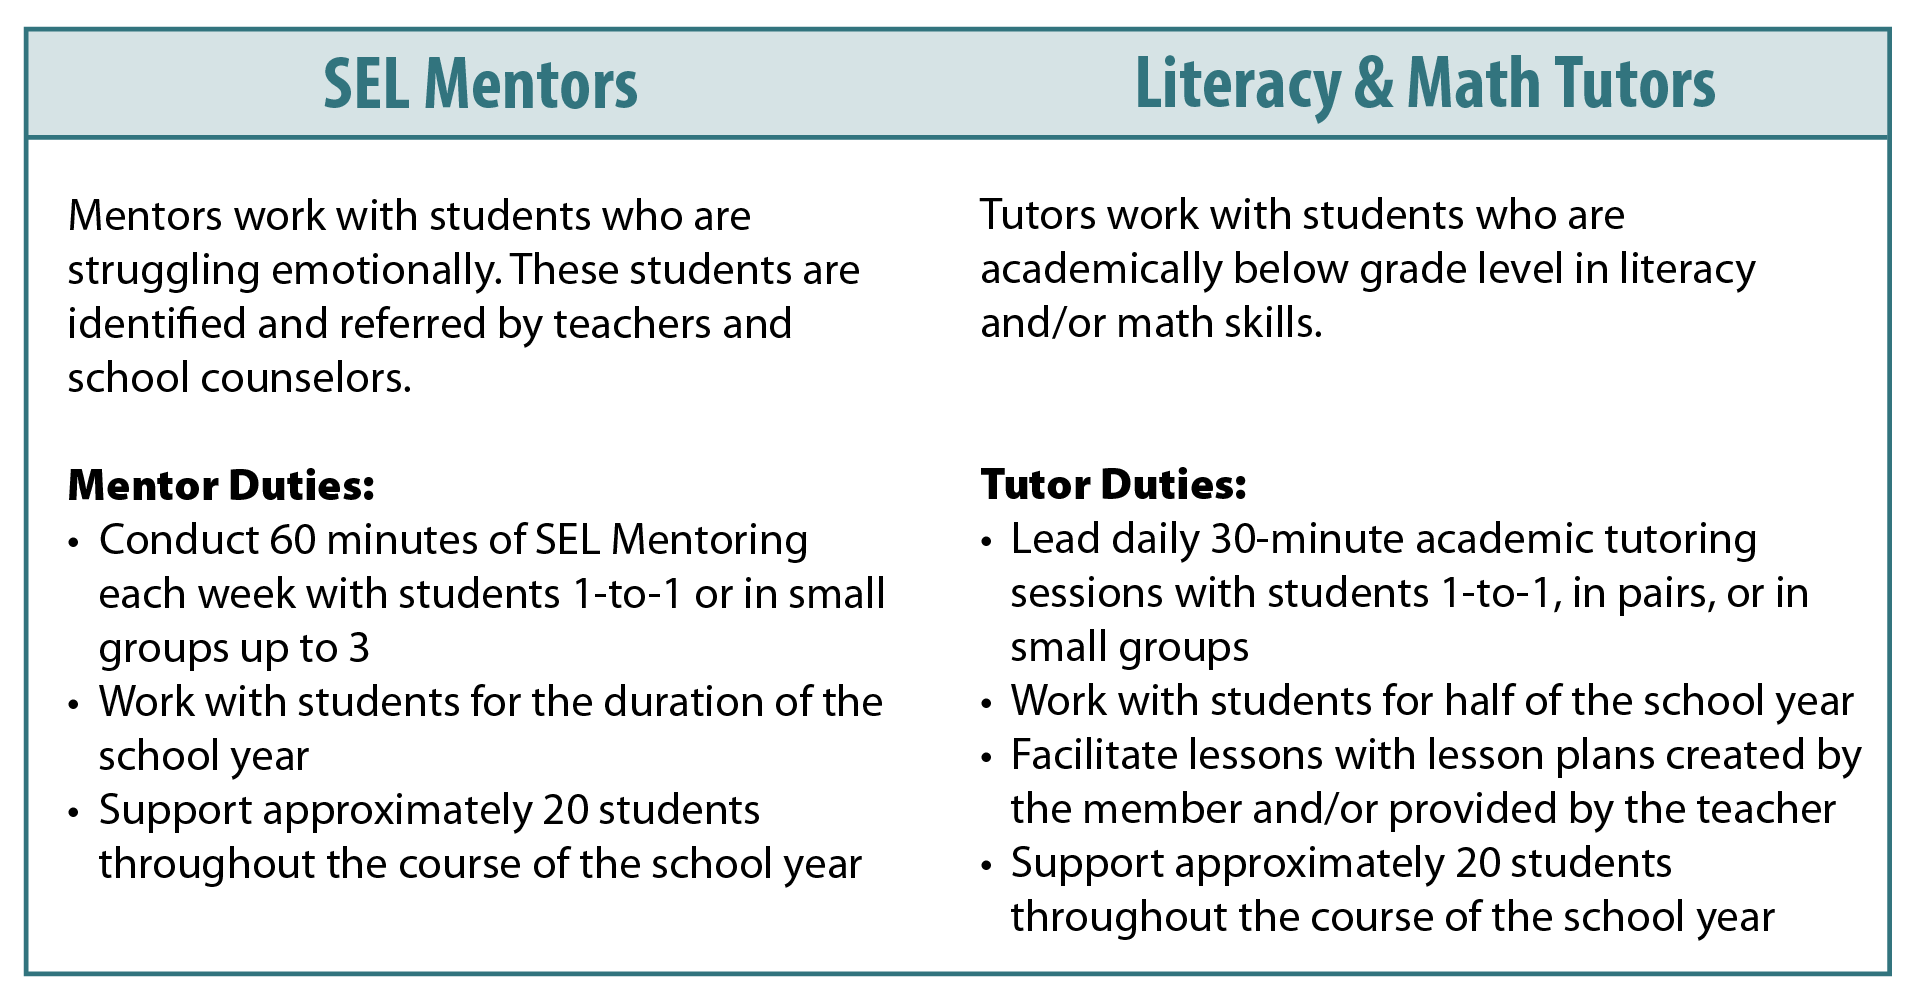 SEL Mentors and Literacy and Math Tutors table